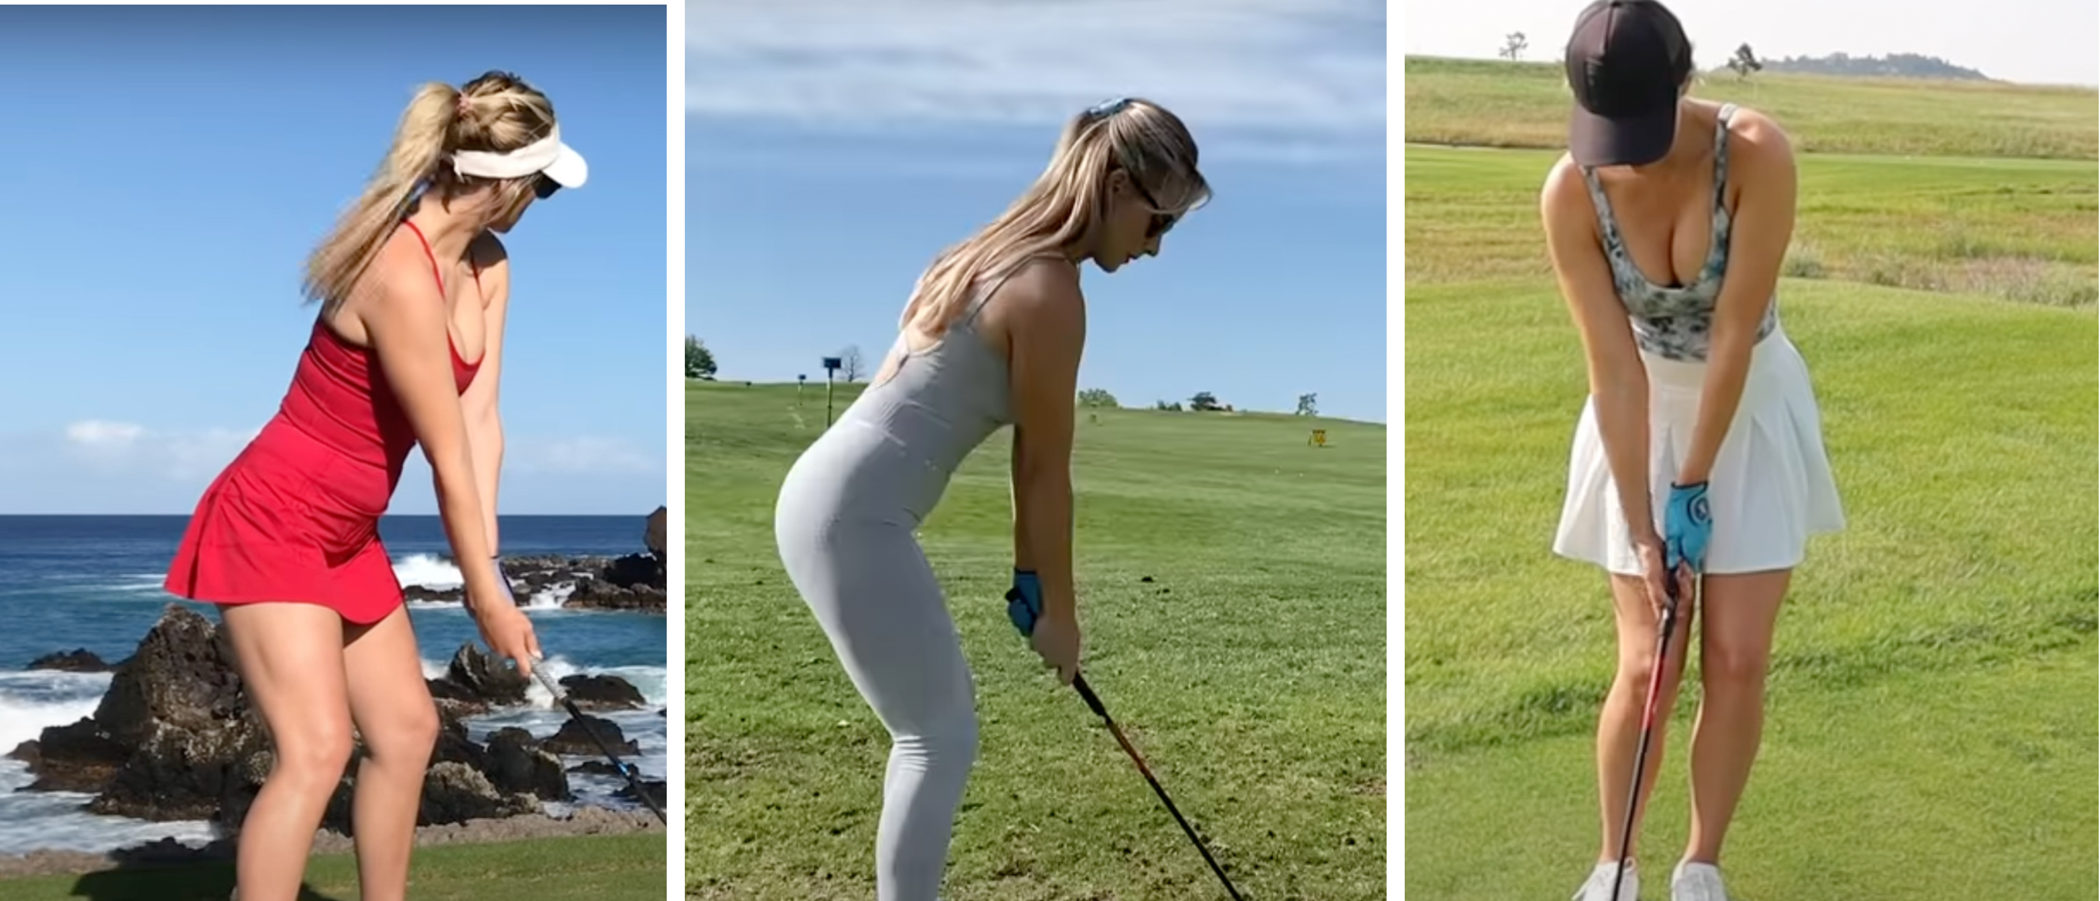 In Defense Of The Golf Thot